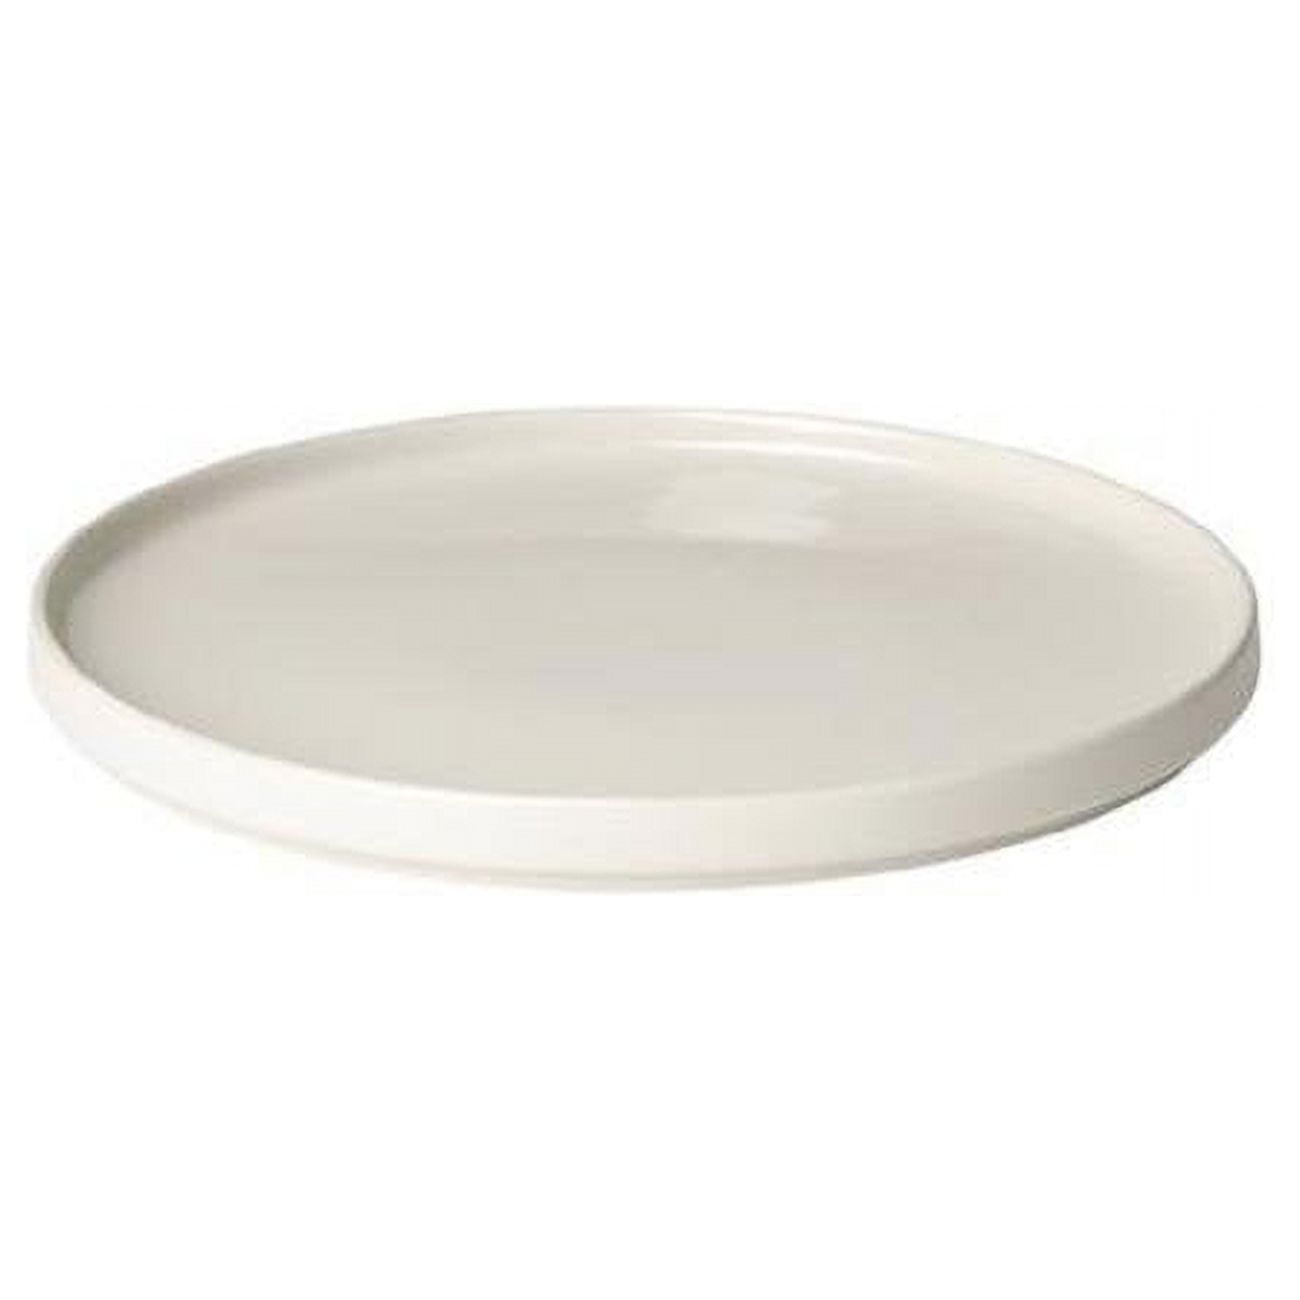 63717.4 11 In. Mio Dinner Plate, Grey - Set Of 4